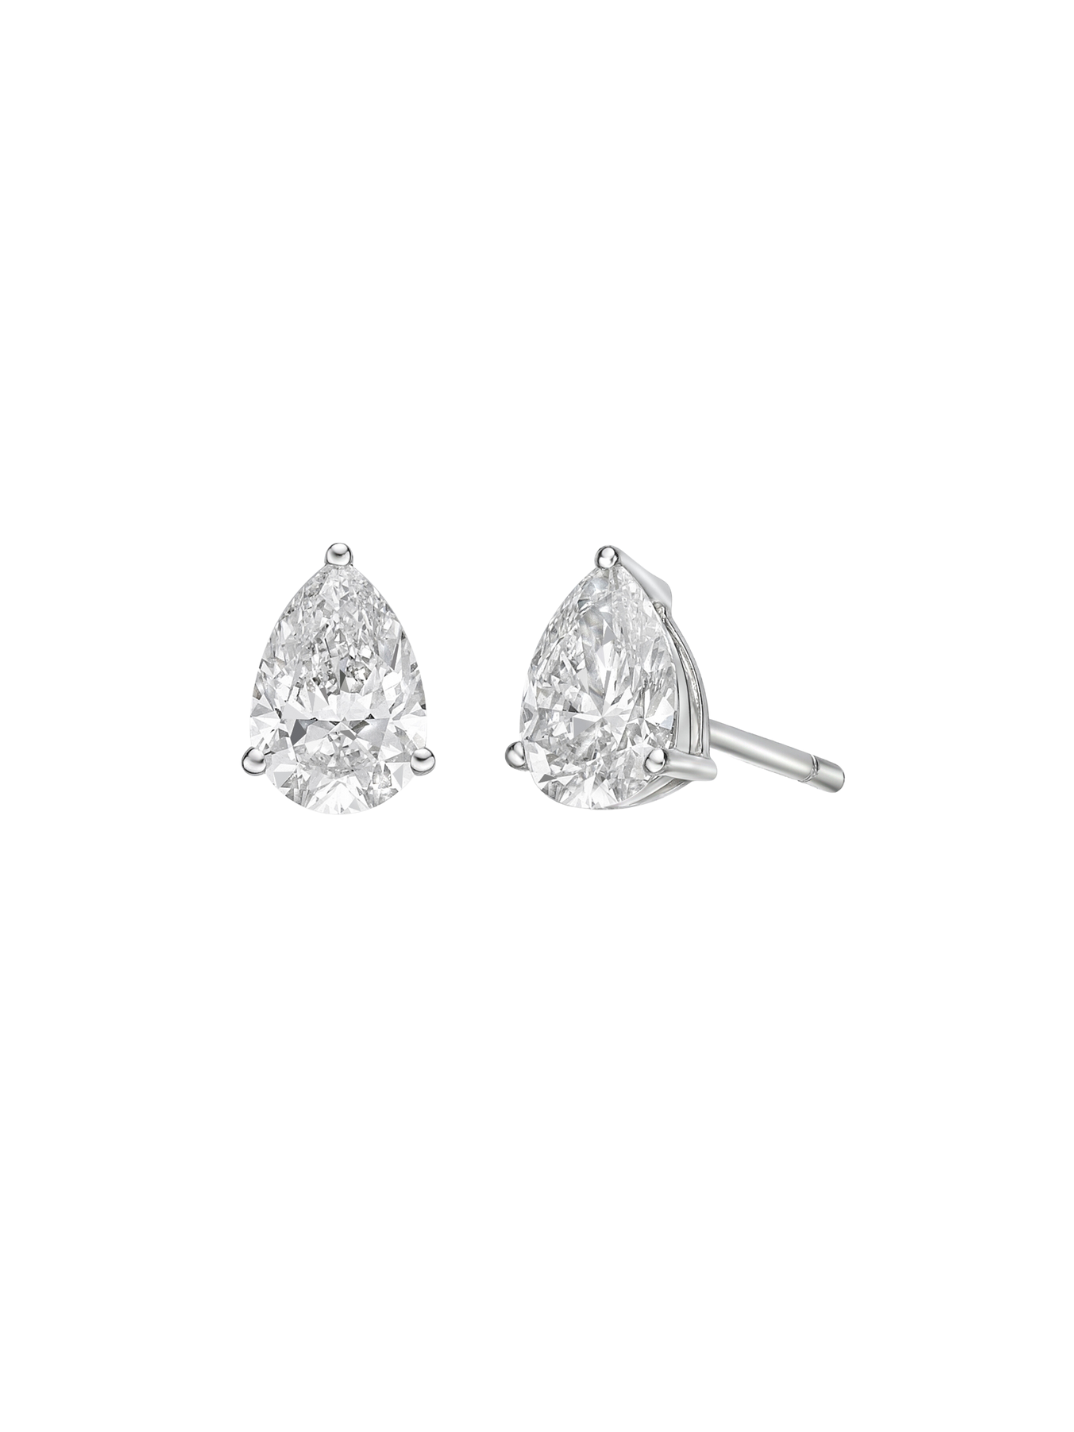 classic three-prong pear earrings women's jewelry sustainable accessories